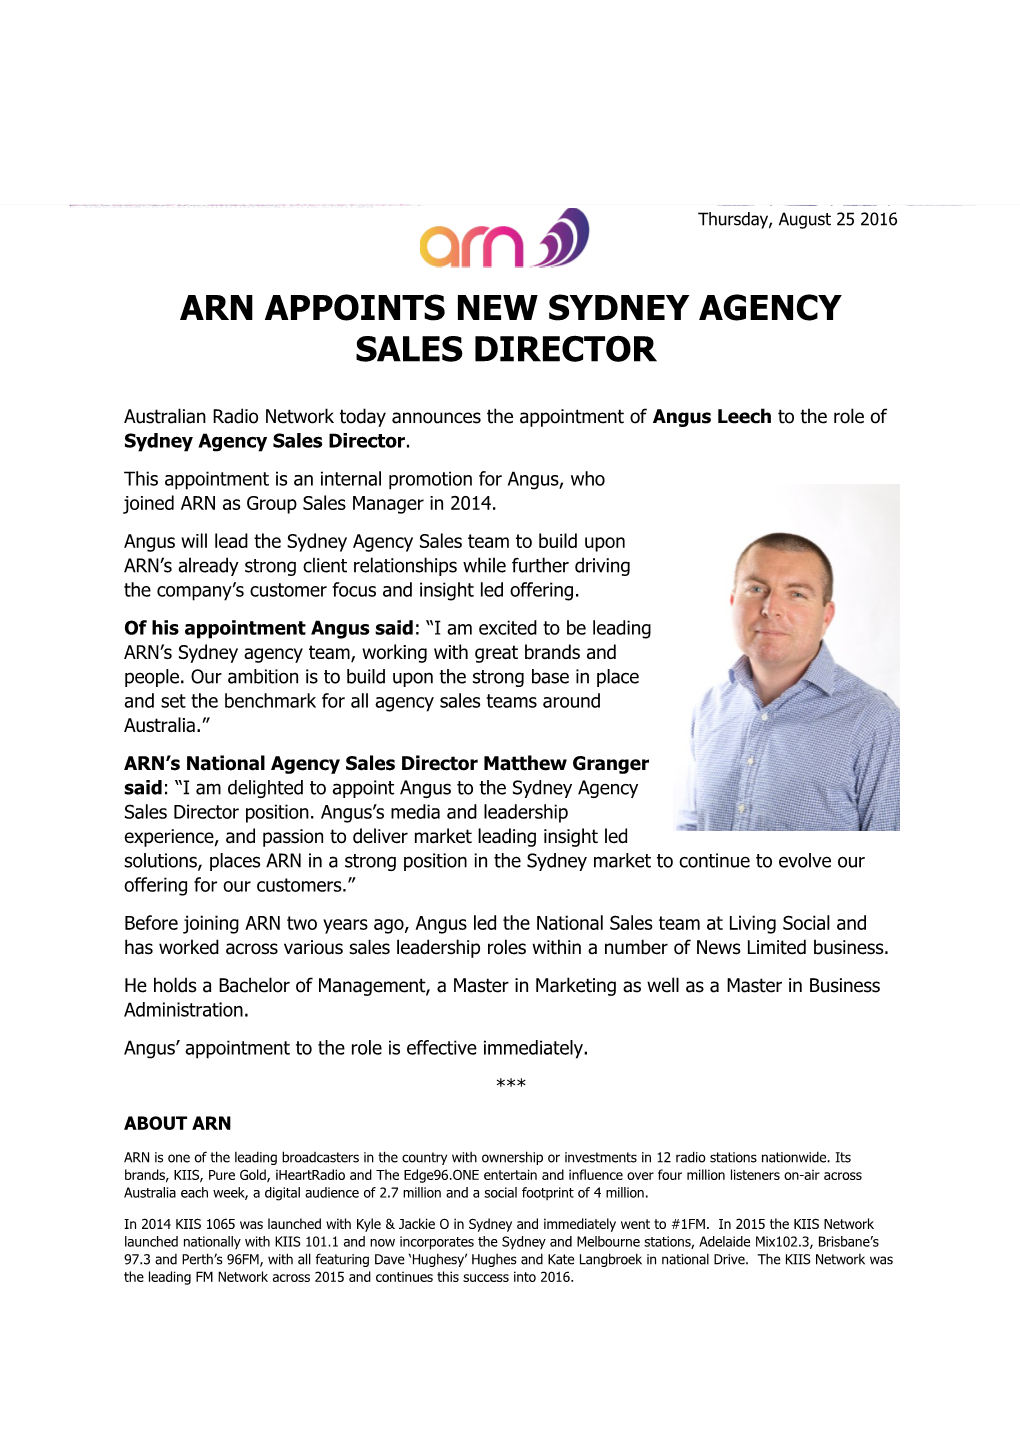 Arn Appoints New Sydney Agency Sales Director